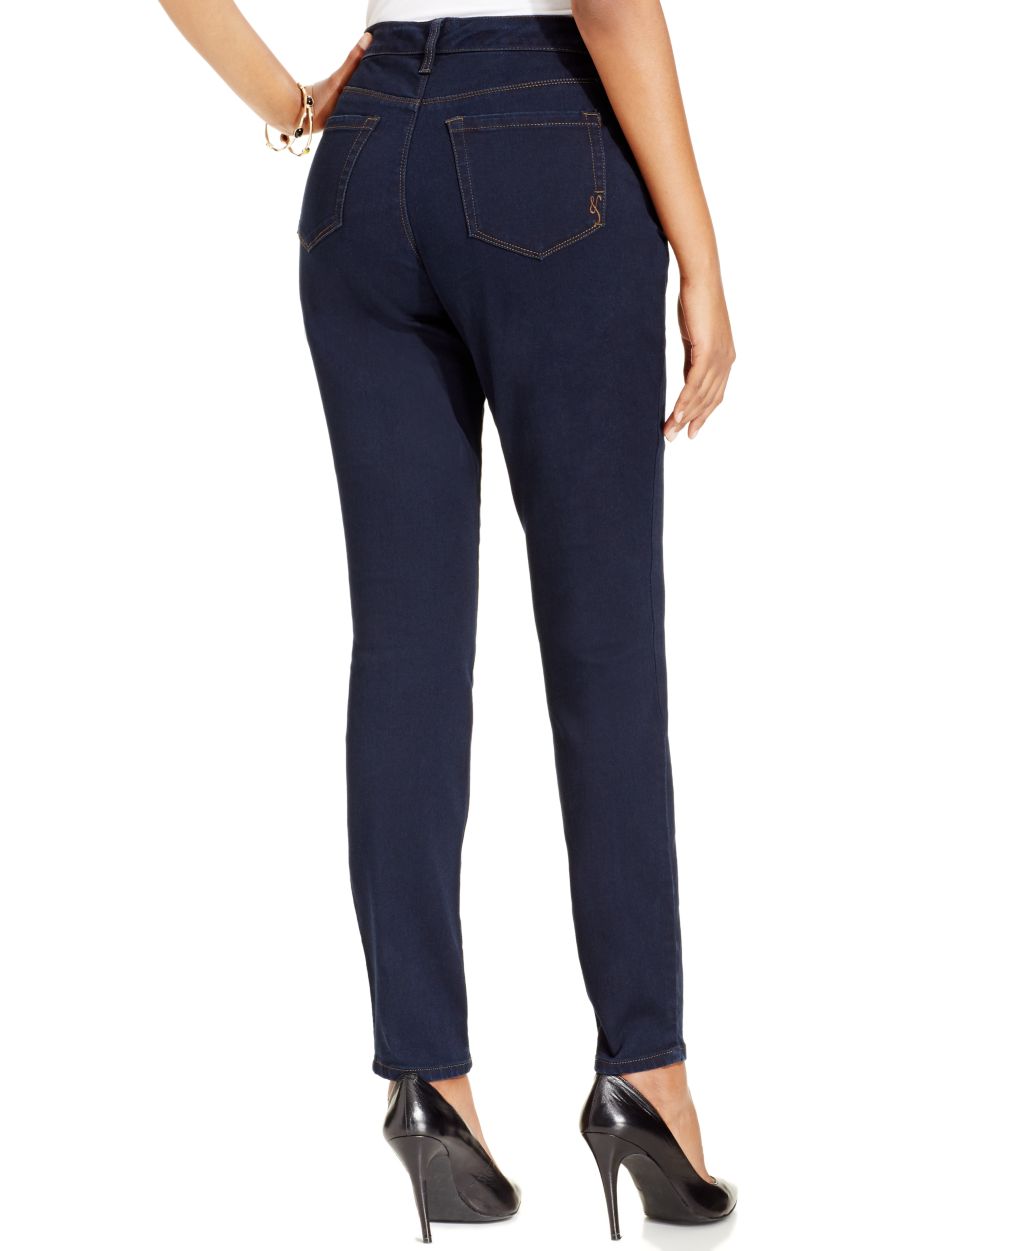 Style & Co. Cotton/polyester/spandex Curvy-Fit Skinny Jeans, Only at Macy's